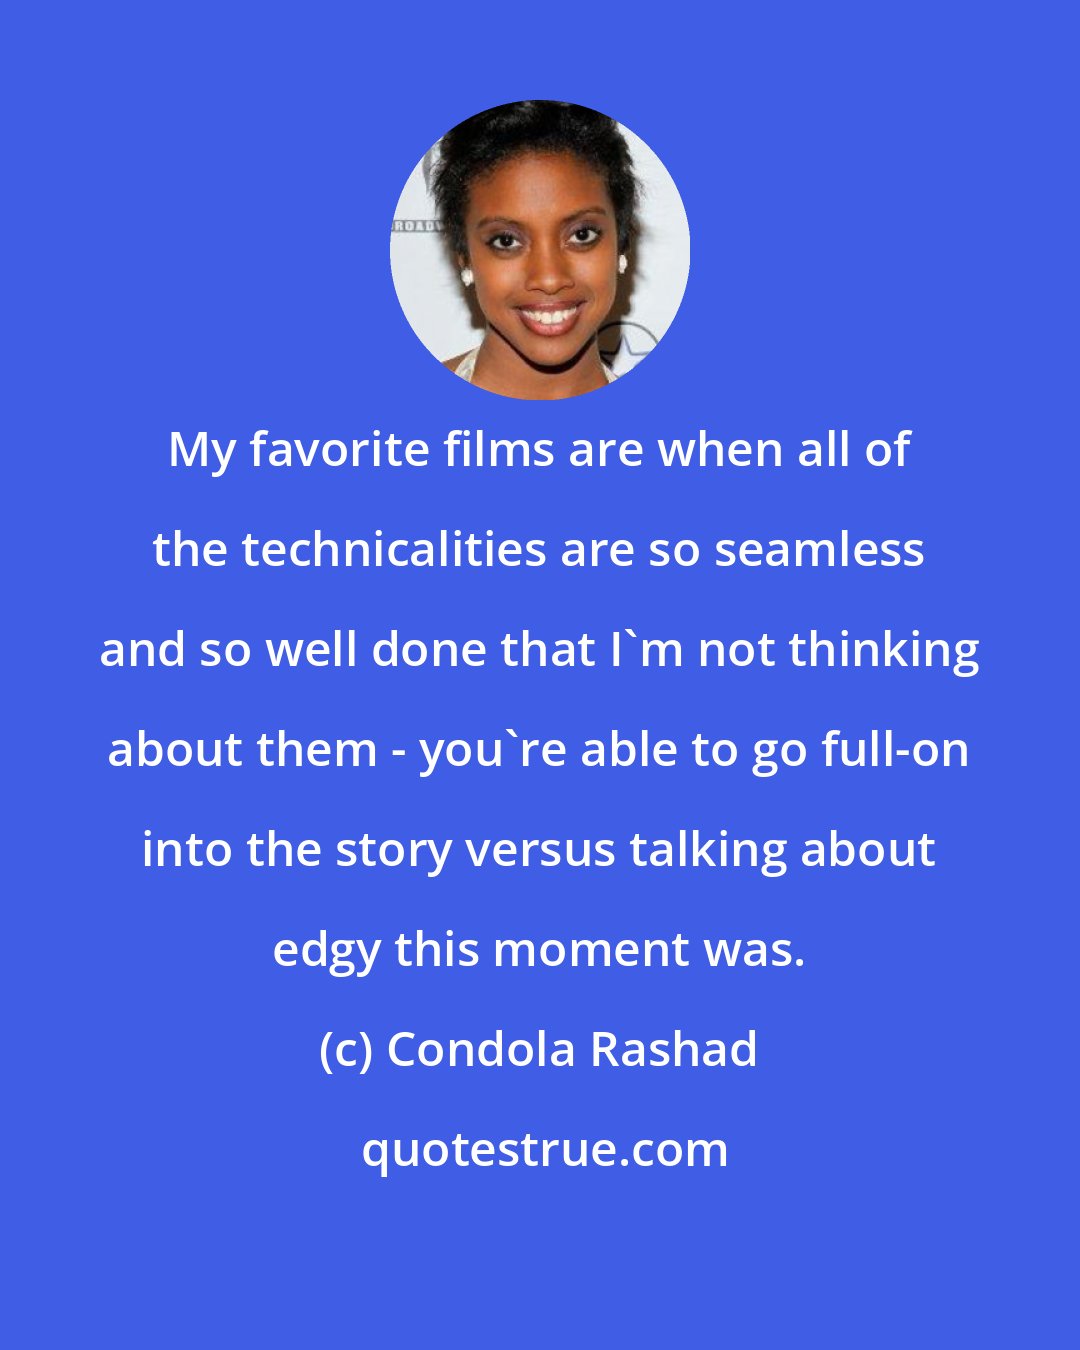 Condola Rashad: My favorite films are when all of the technicalities are so seamless and so well done that I'm not thinking about them - you're able to go full-on into the story versus talking about edgy this moment was.